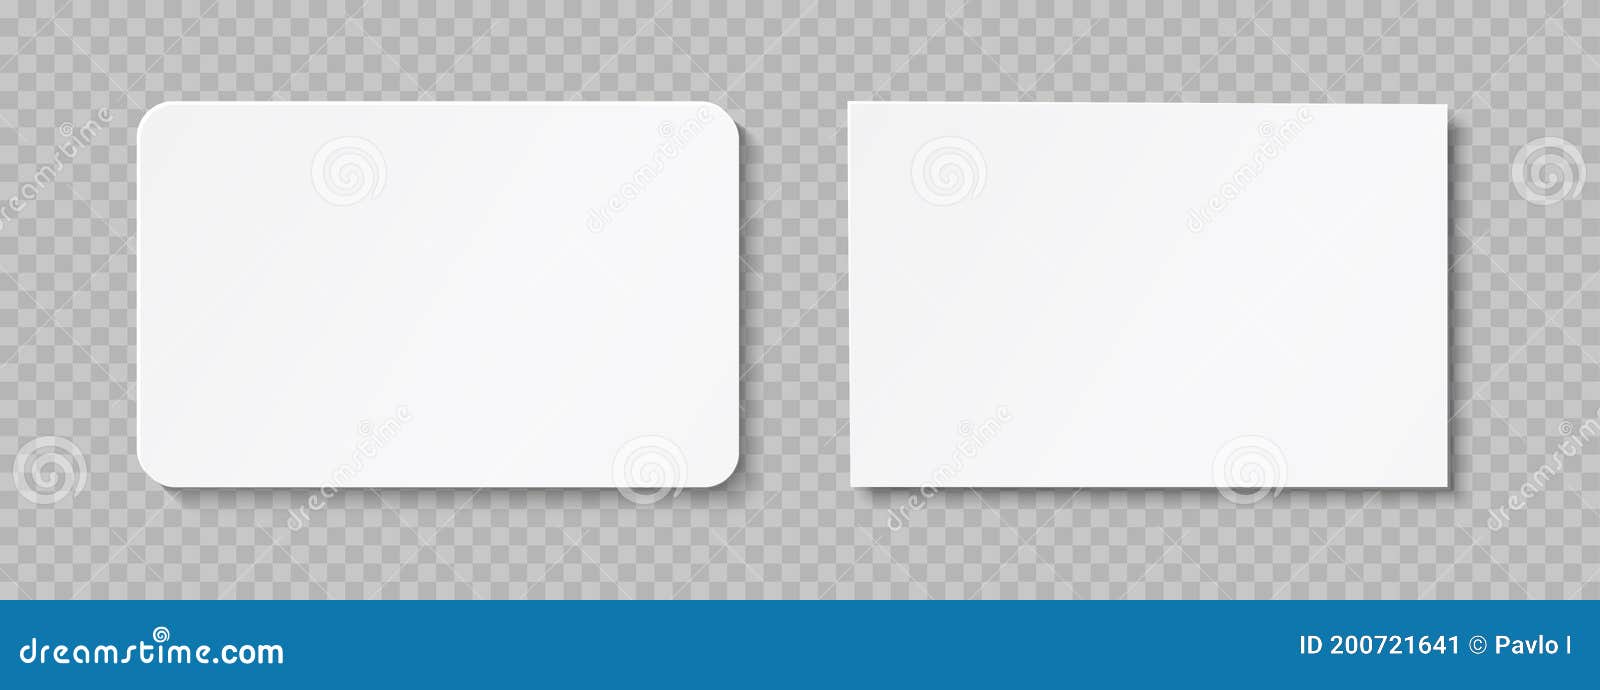 realistic business card template mockup plastic paper with shadows on a transparent background with rounded and sharp corners